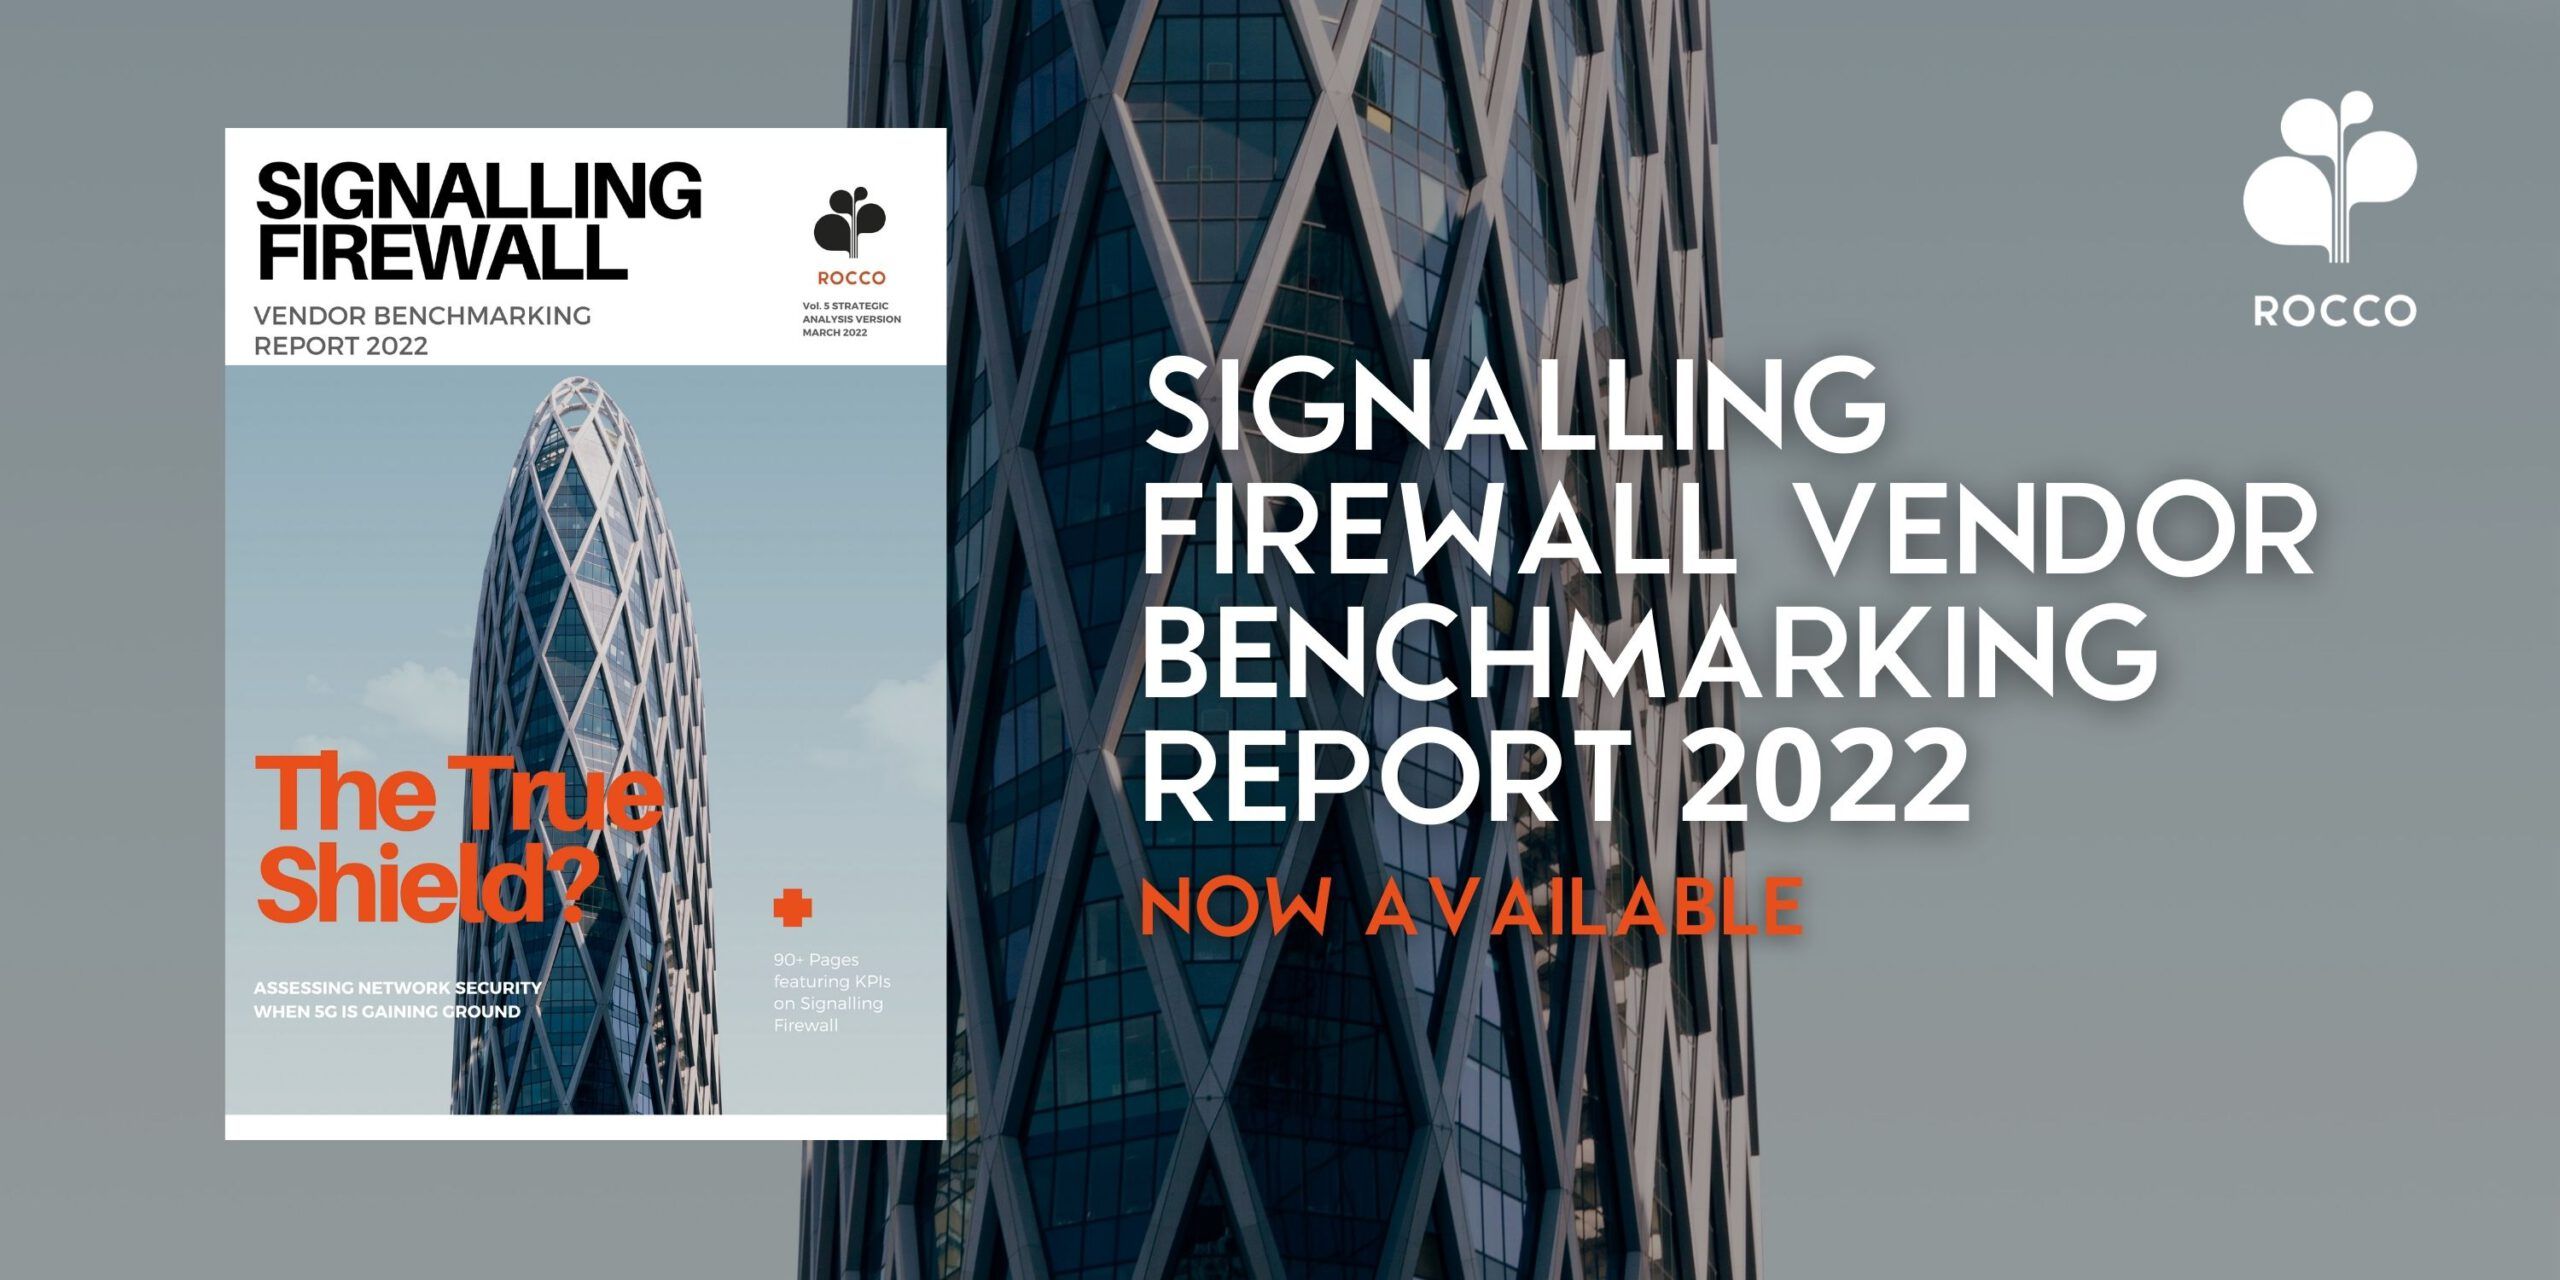 Vendor Benchmarking Report for Signalling Firewall is now released